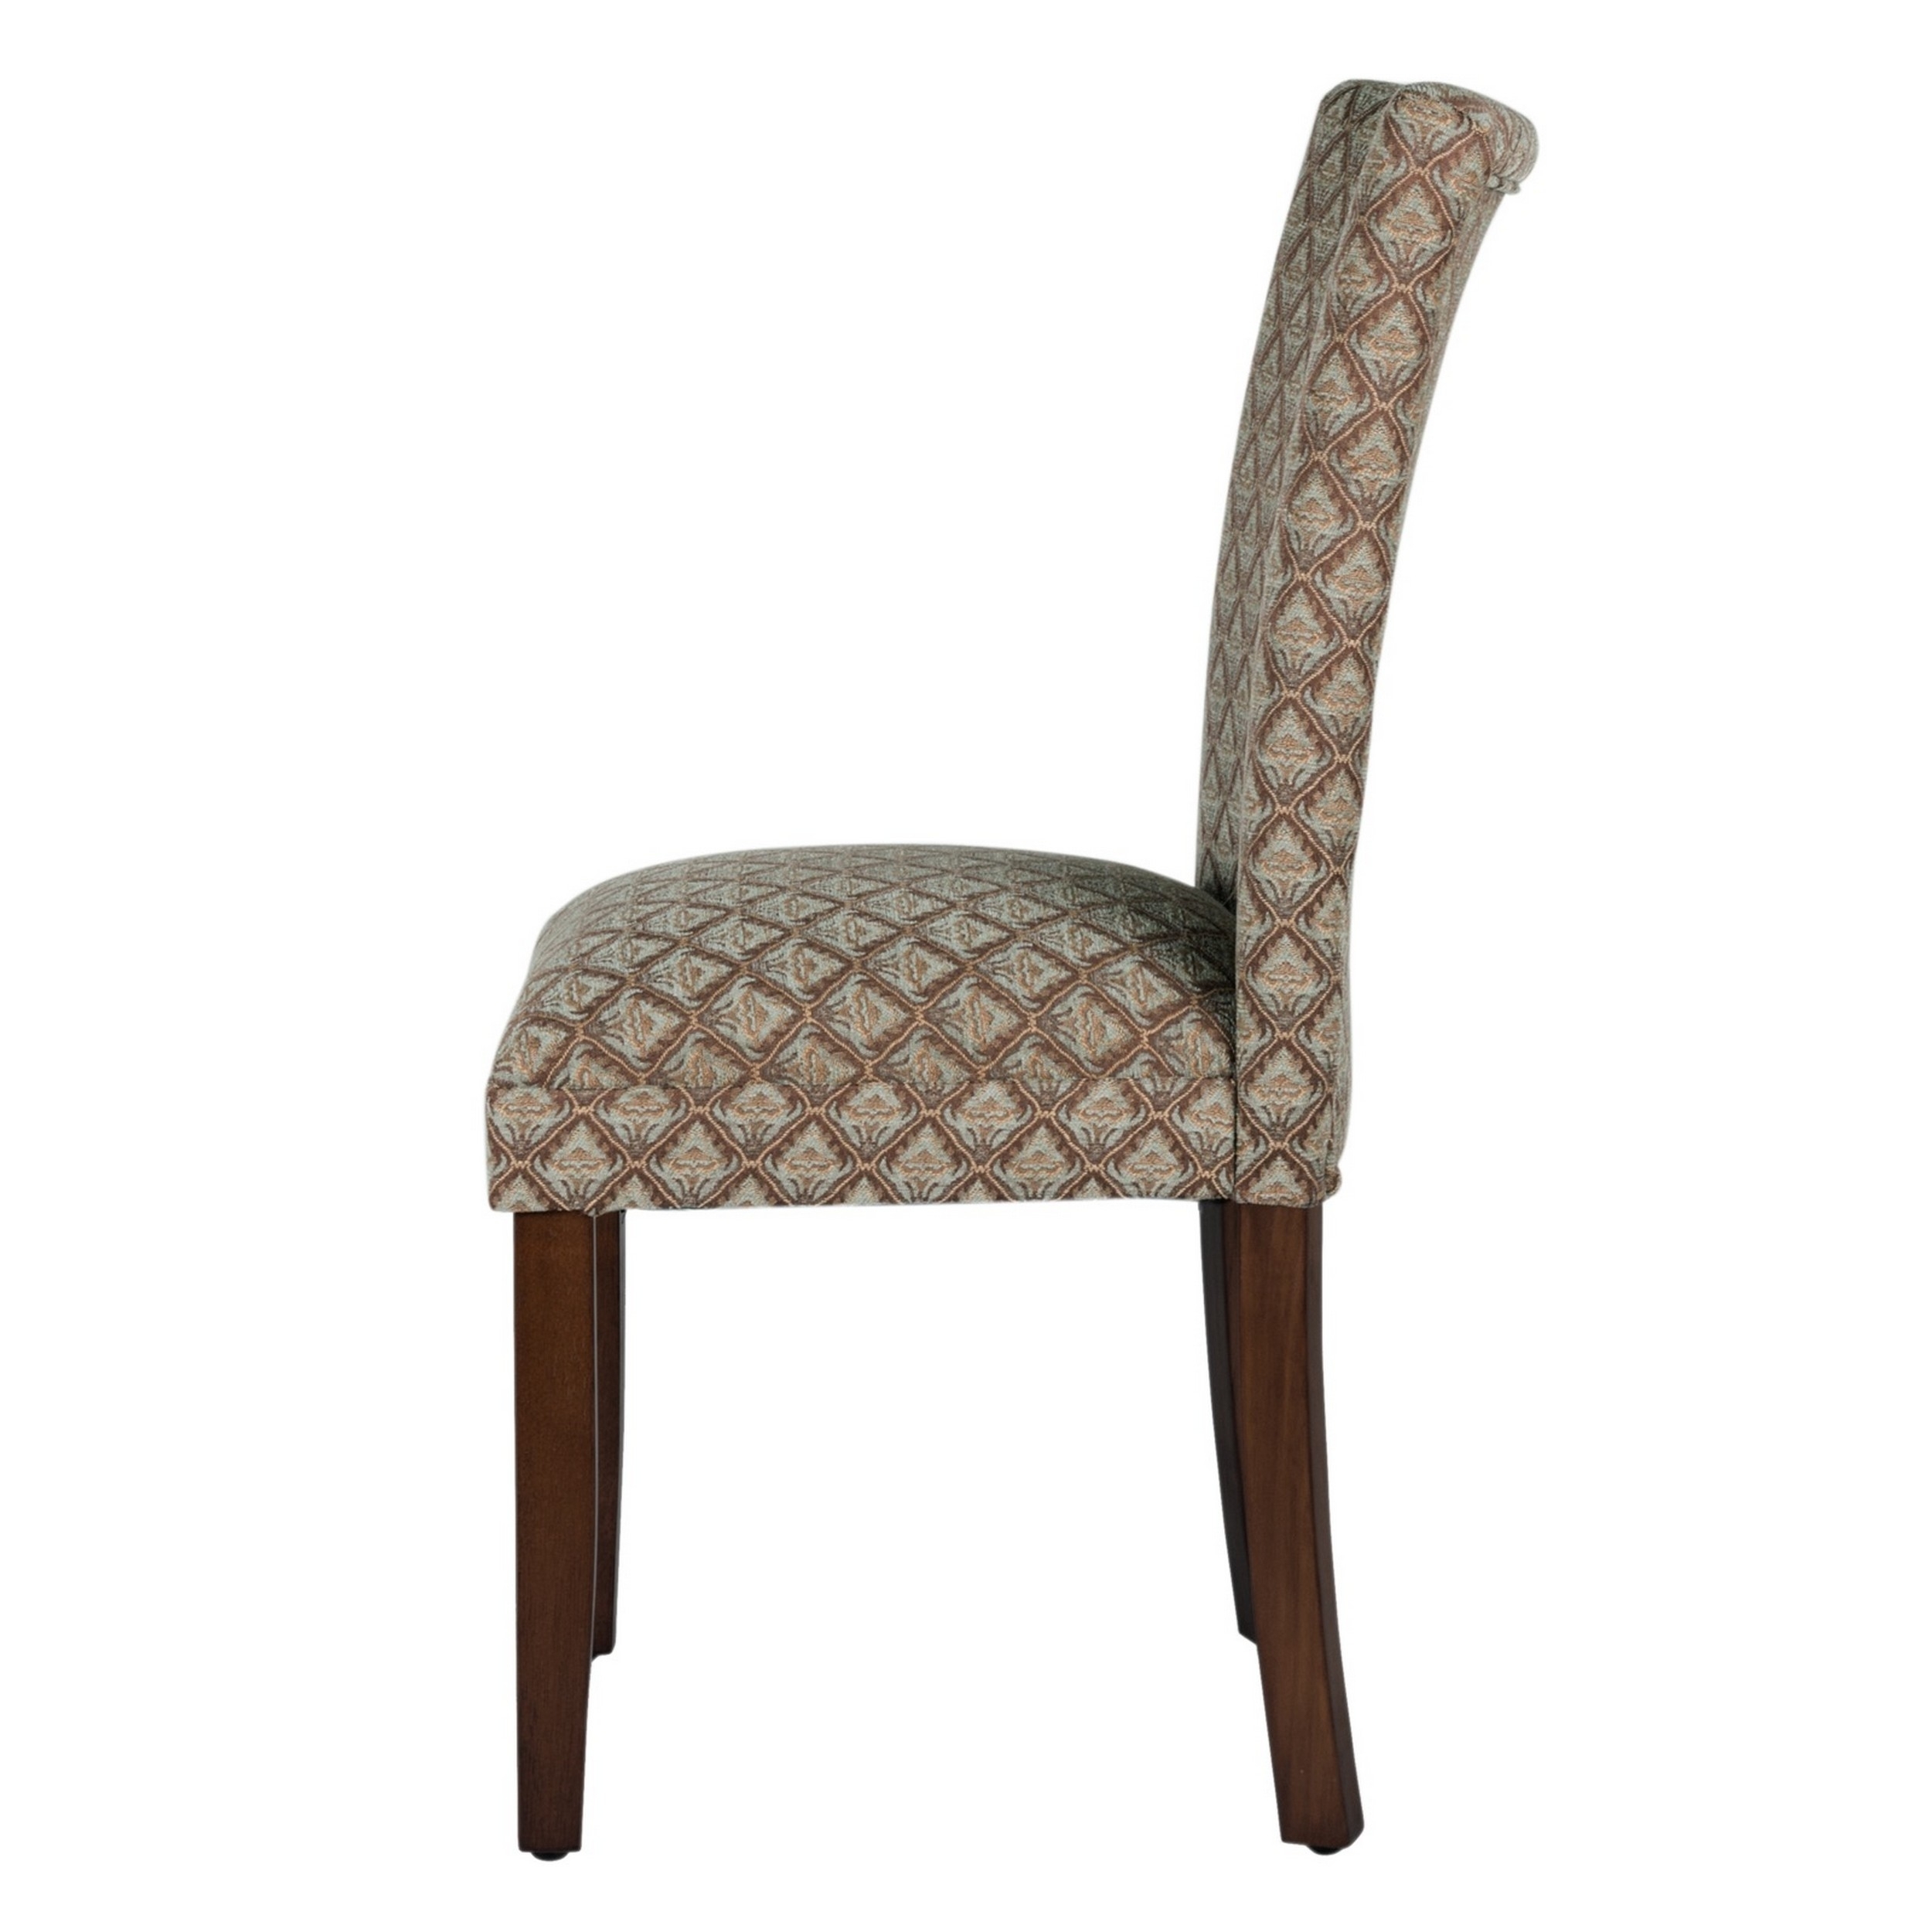 Wooden Parson Dining Chair With Damask Pattern Fabric Upholstery, Multicolor- Saltoro Sherpi